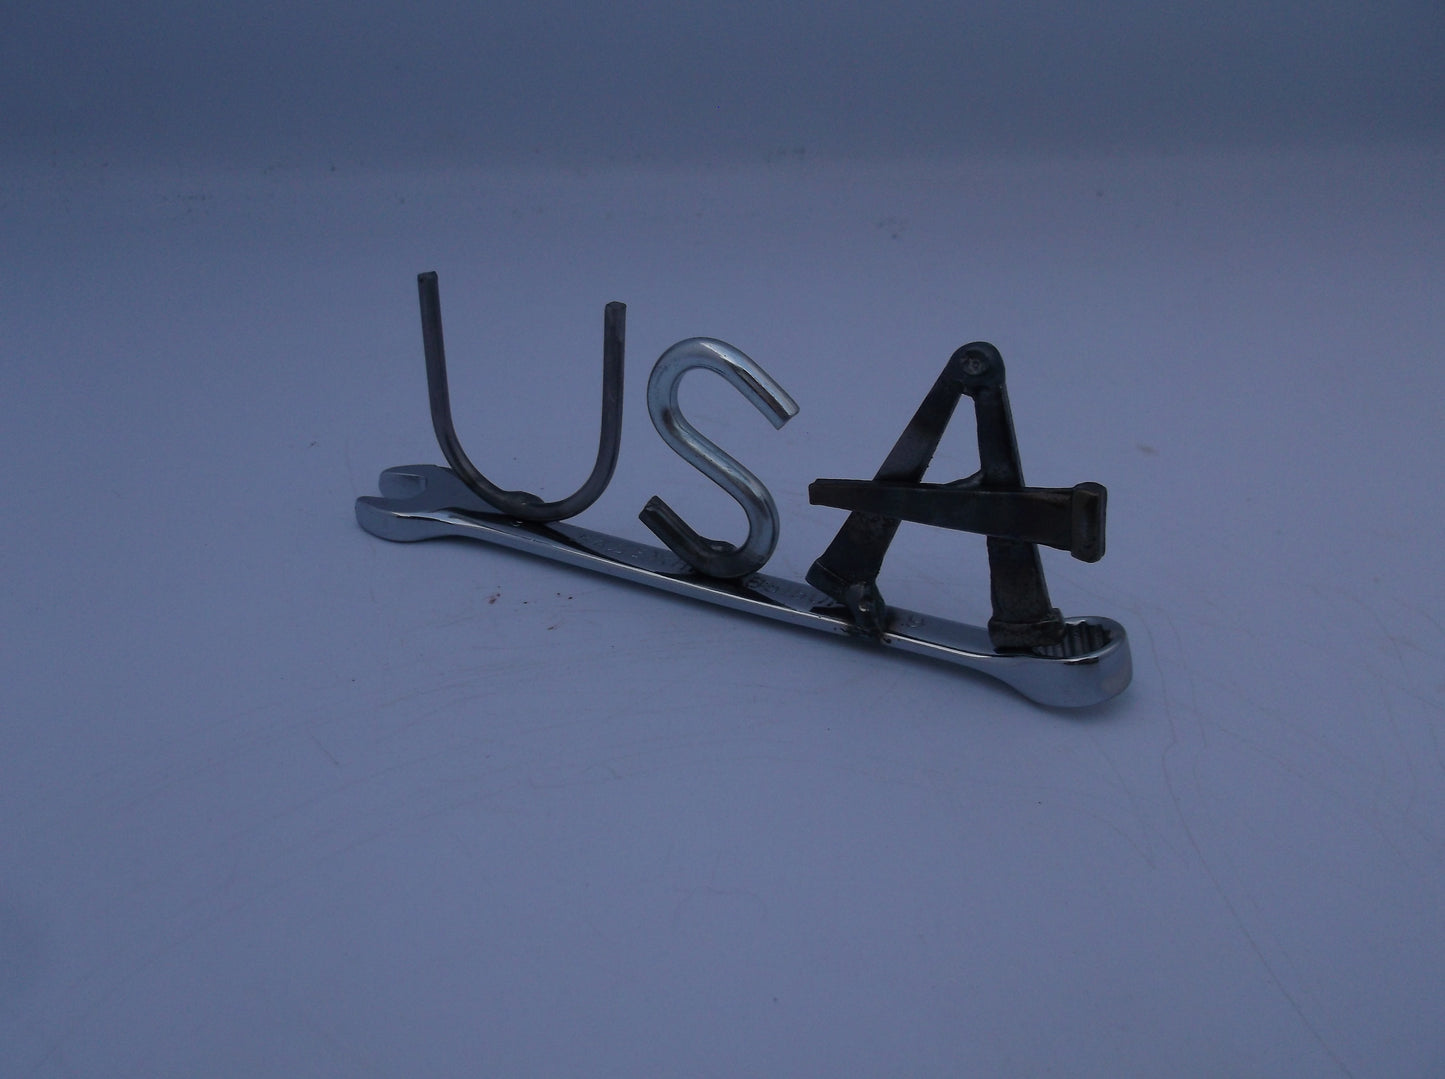 USA, tiny wrench, miniature gift ideas, recycled, up cycled, welded metal art